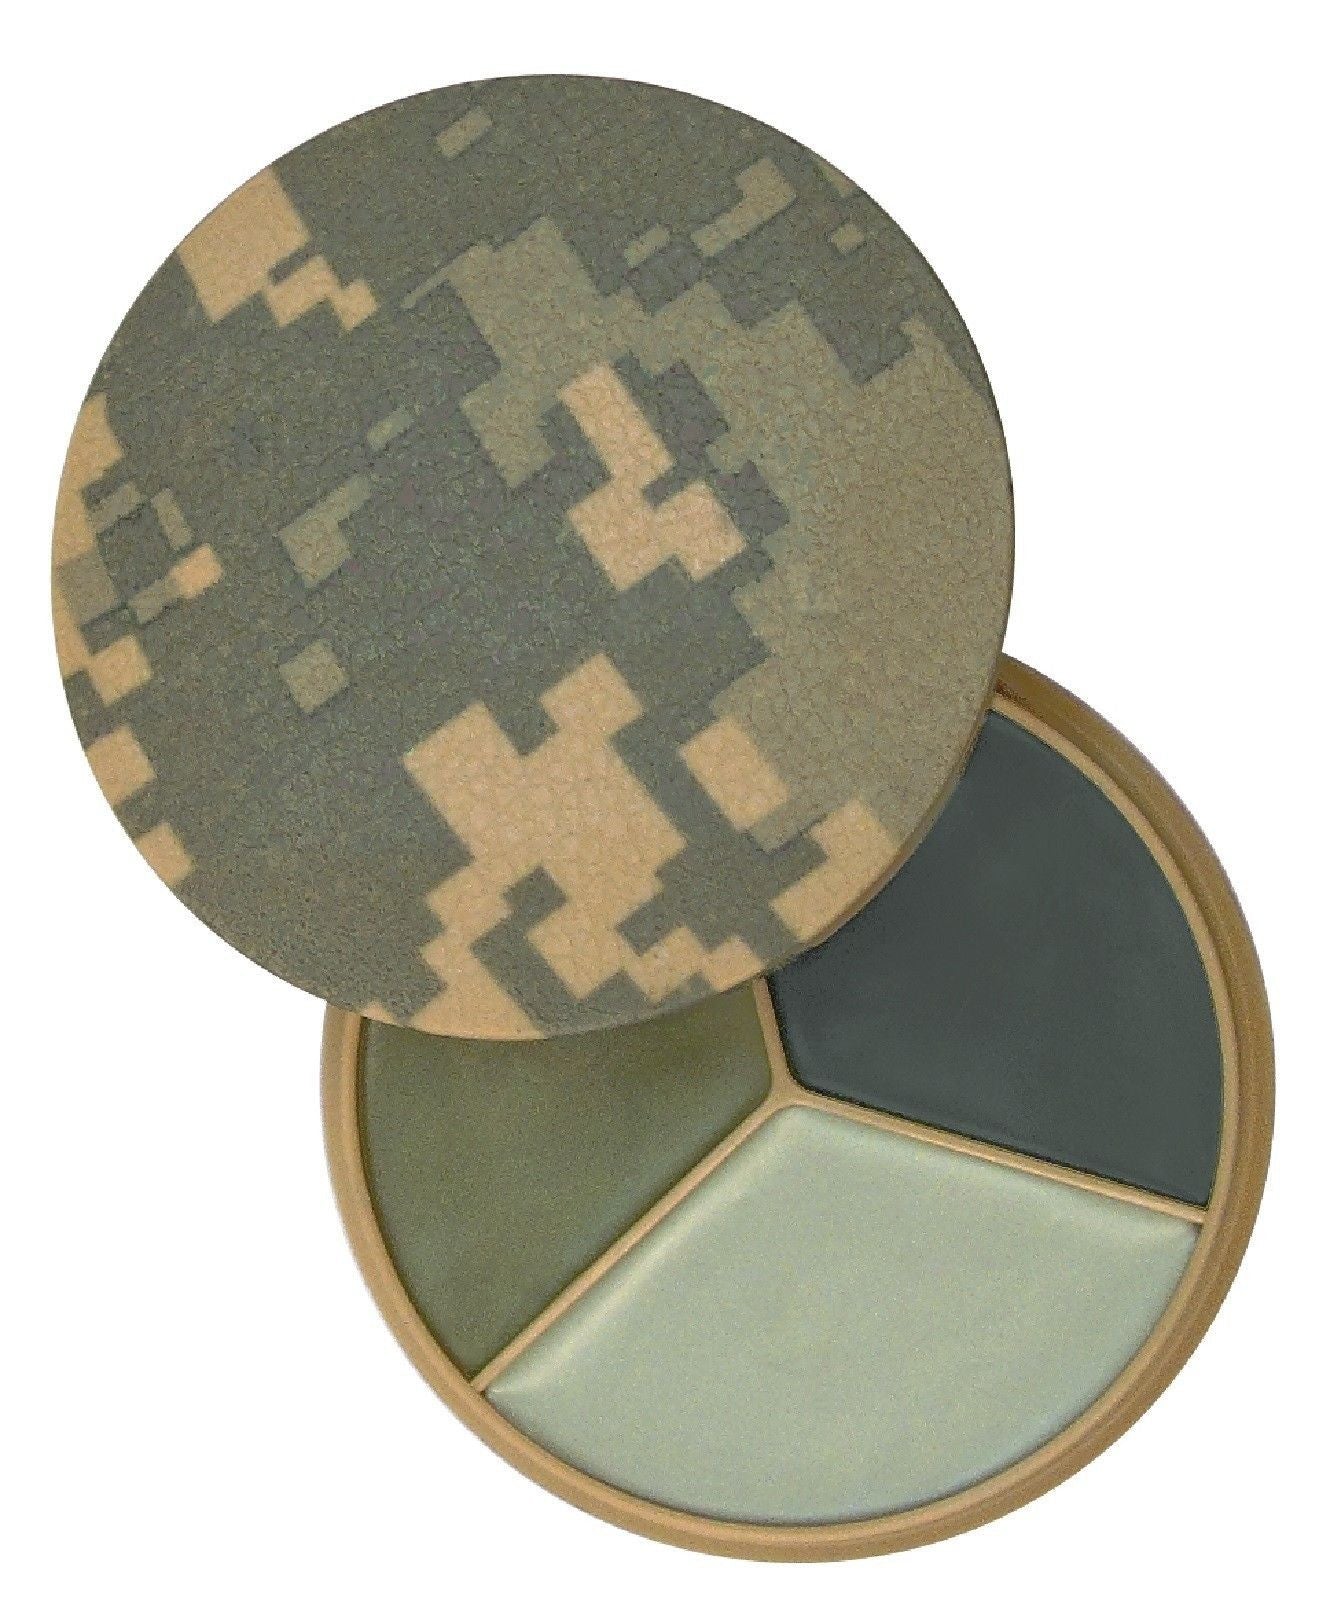 Round GI Type ACU Digital Camo Face Paint - 3 Colors - Compact Includes Mirror